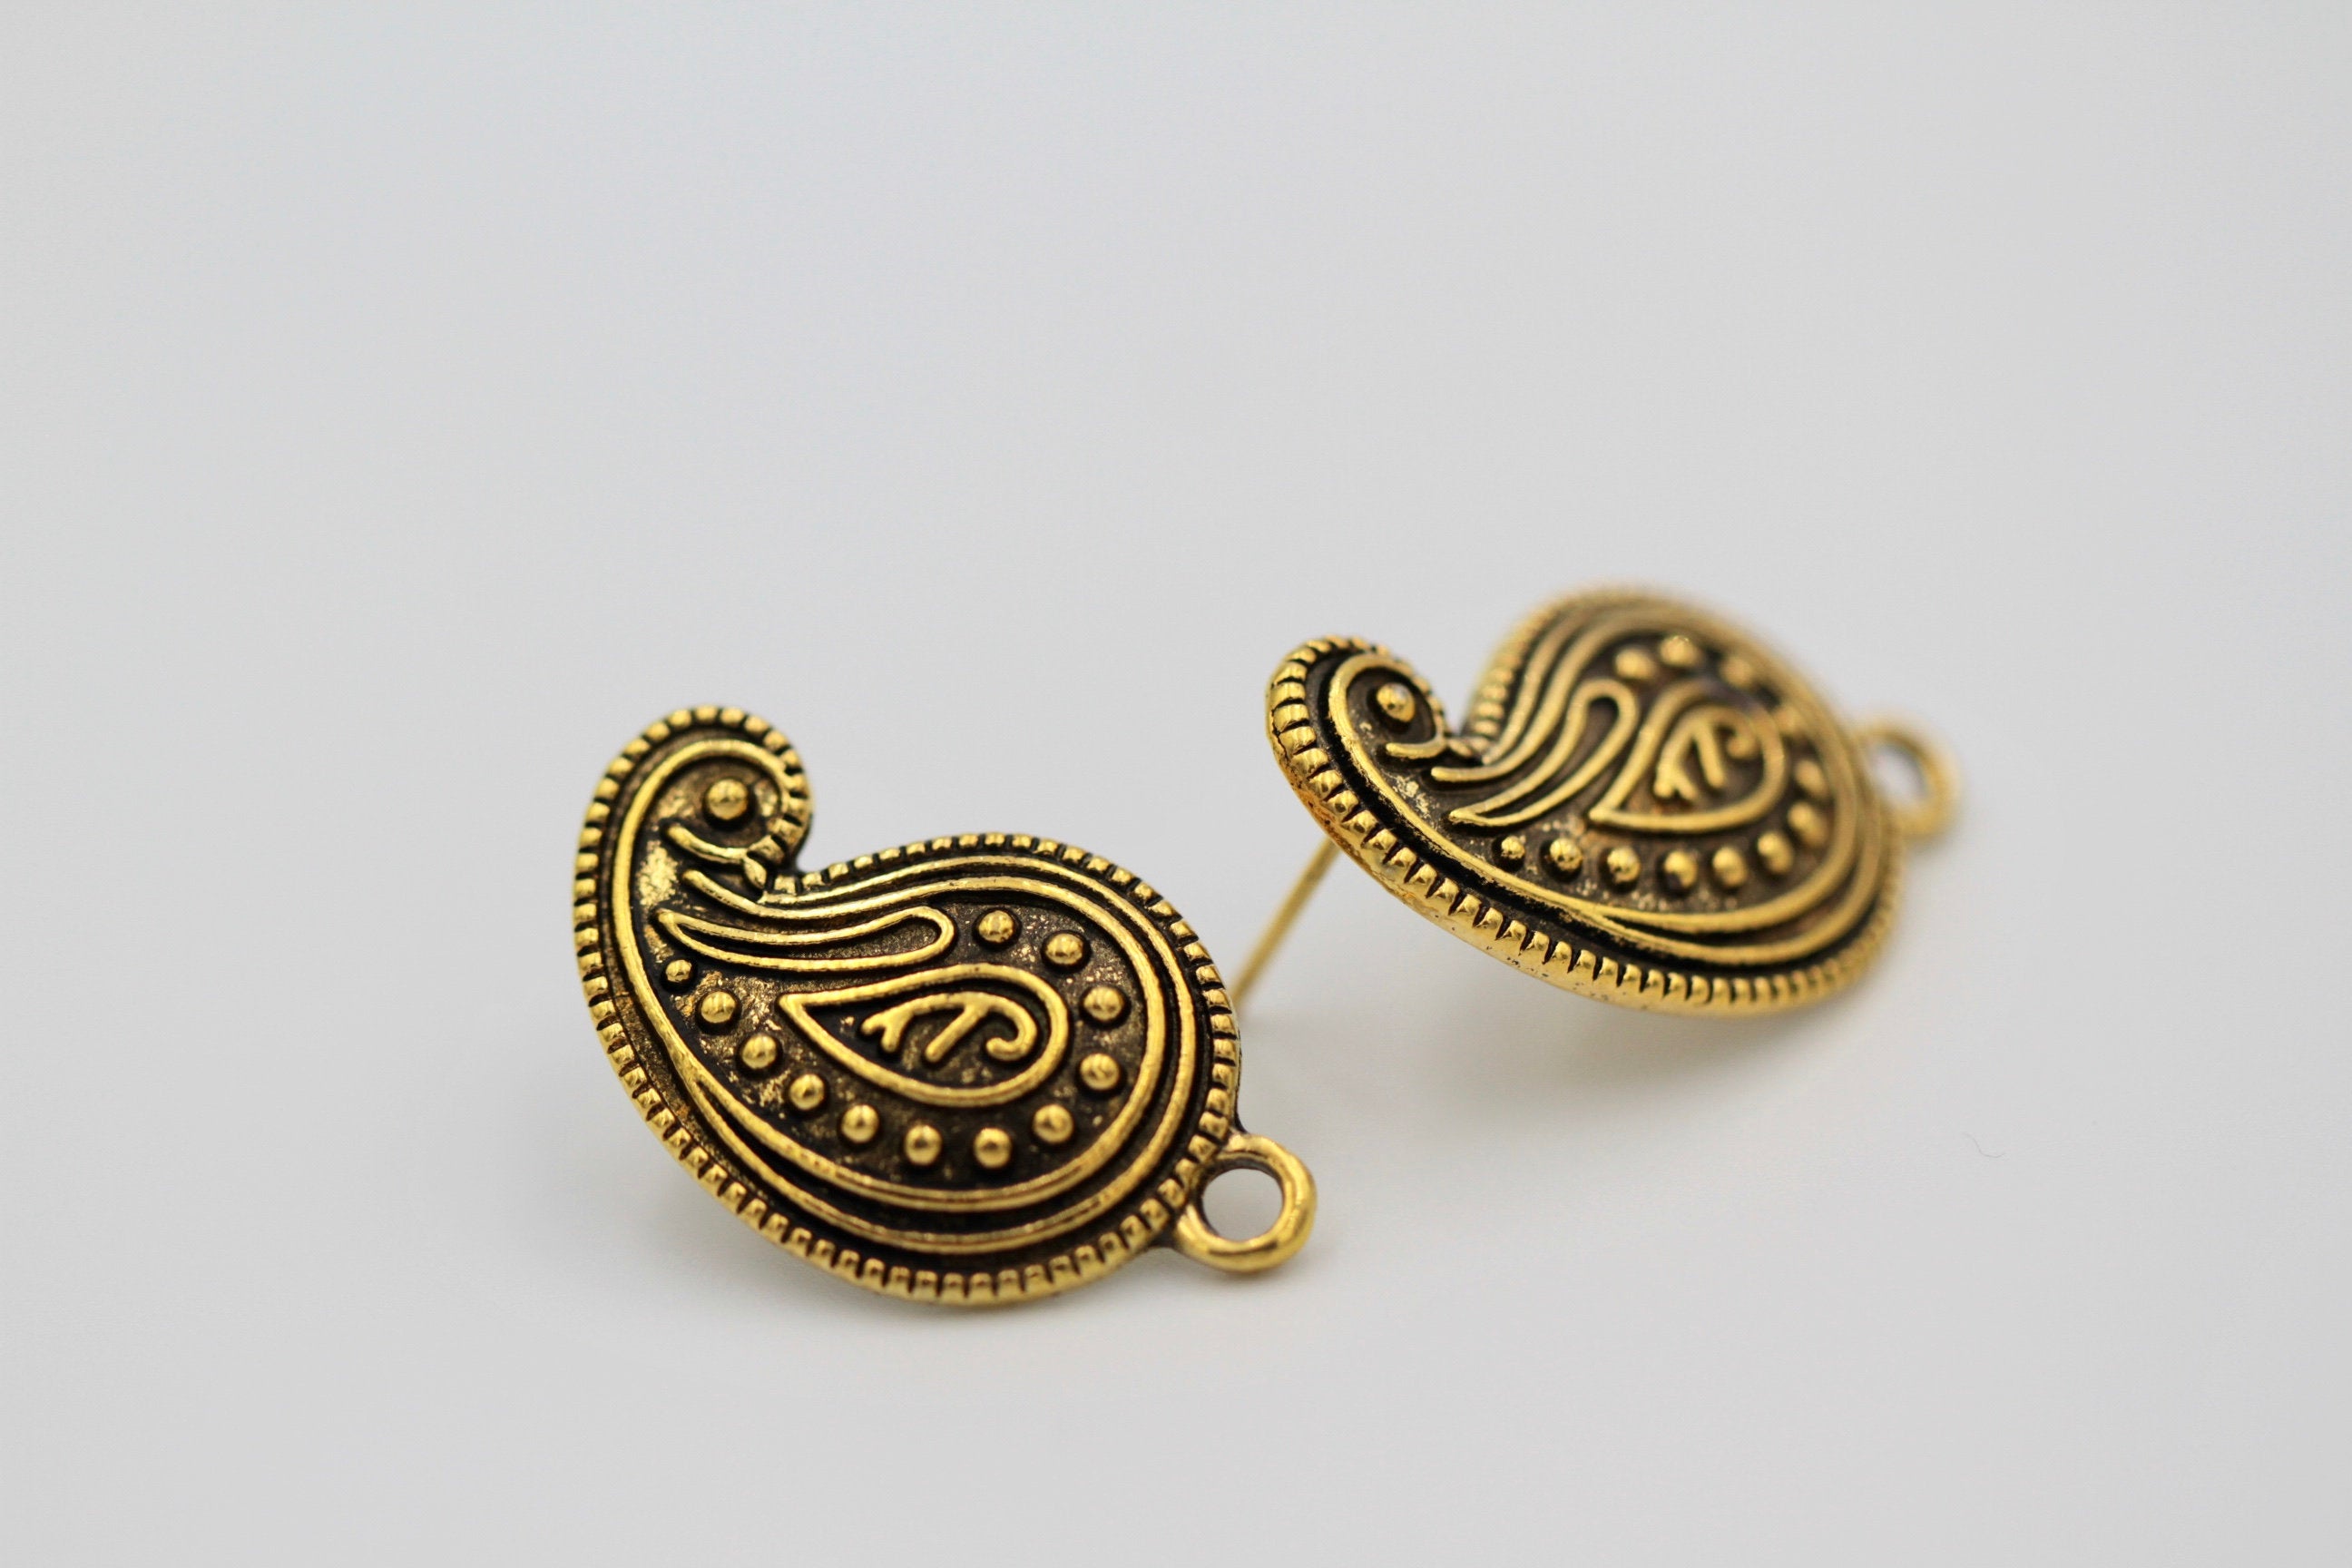 1 pair(2pcs), 21mm x 18mm, Vintage Style Alloy Ear Stud in Antique Gold